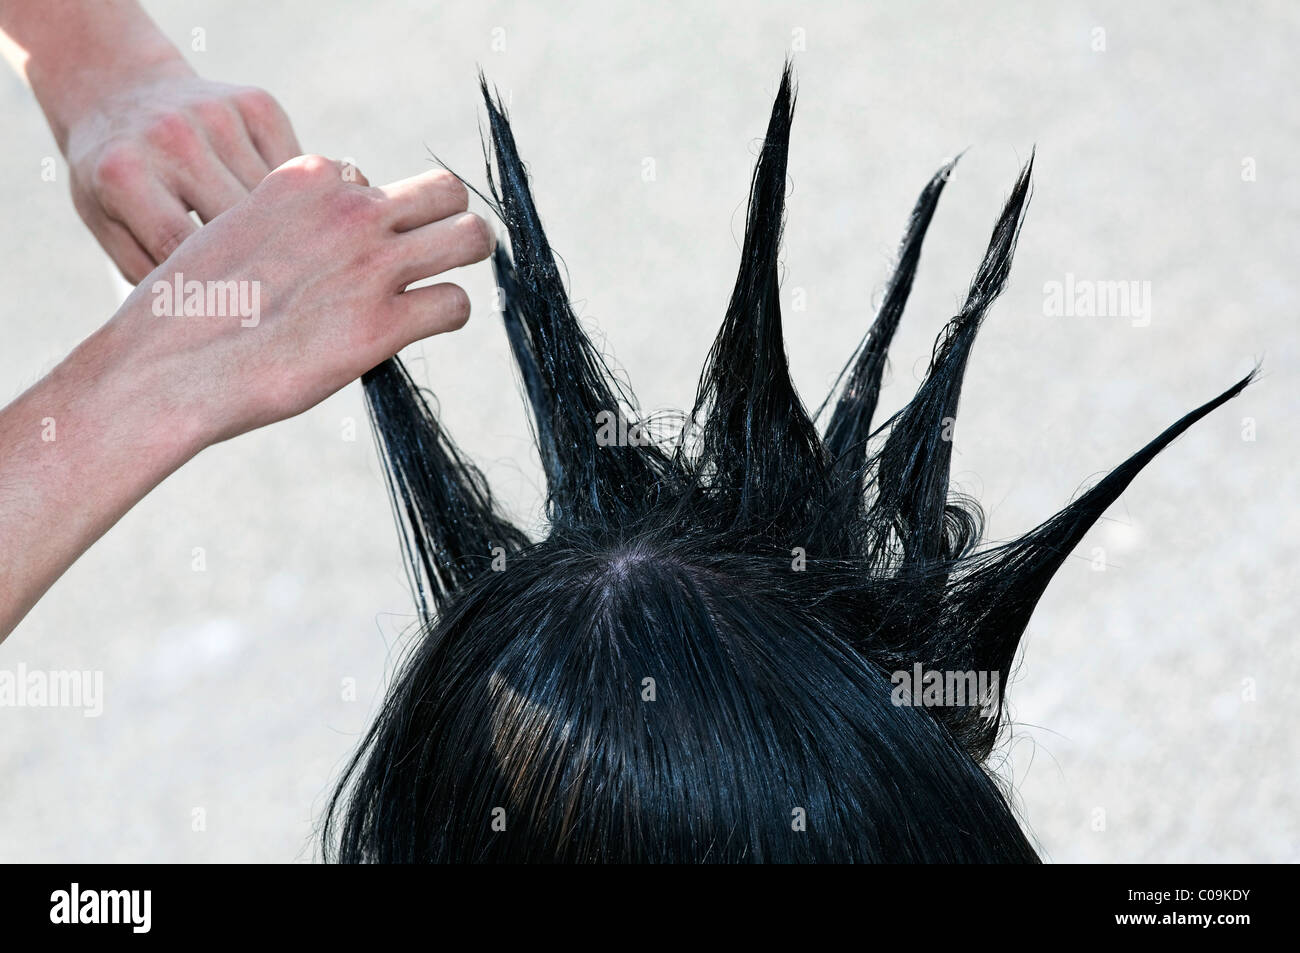 Hands styling hair shaped into tips of a teenager, hairstyle with spikes like a cockscomb, mohawk, mohican Stock Photo